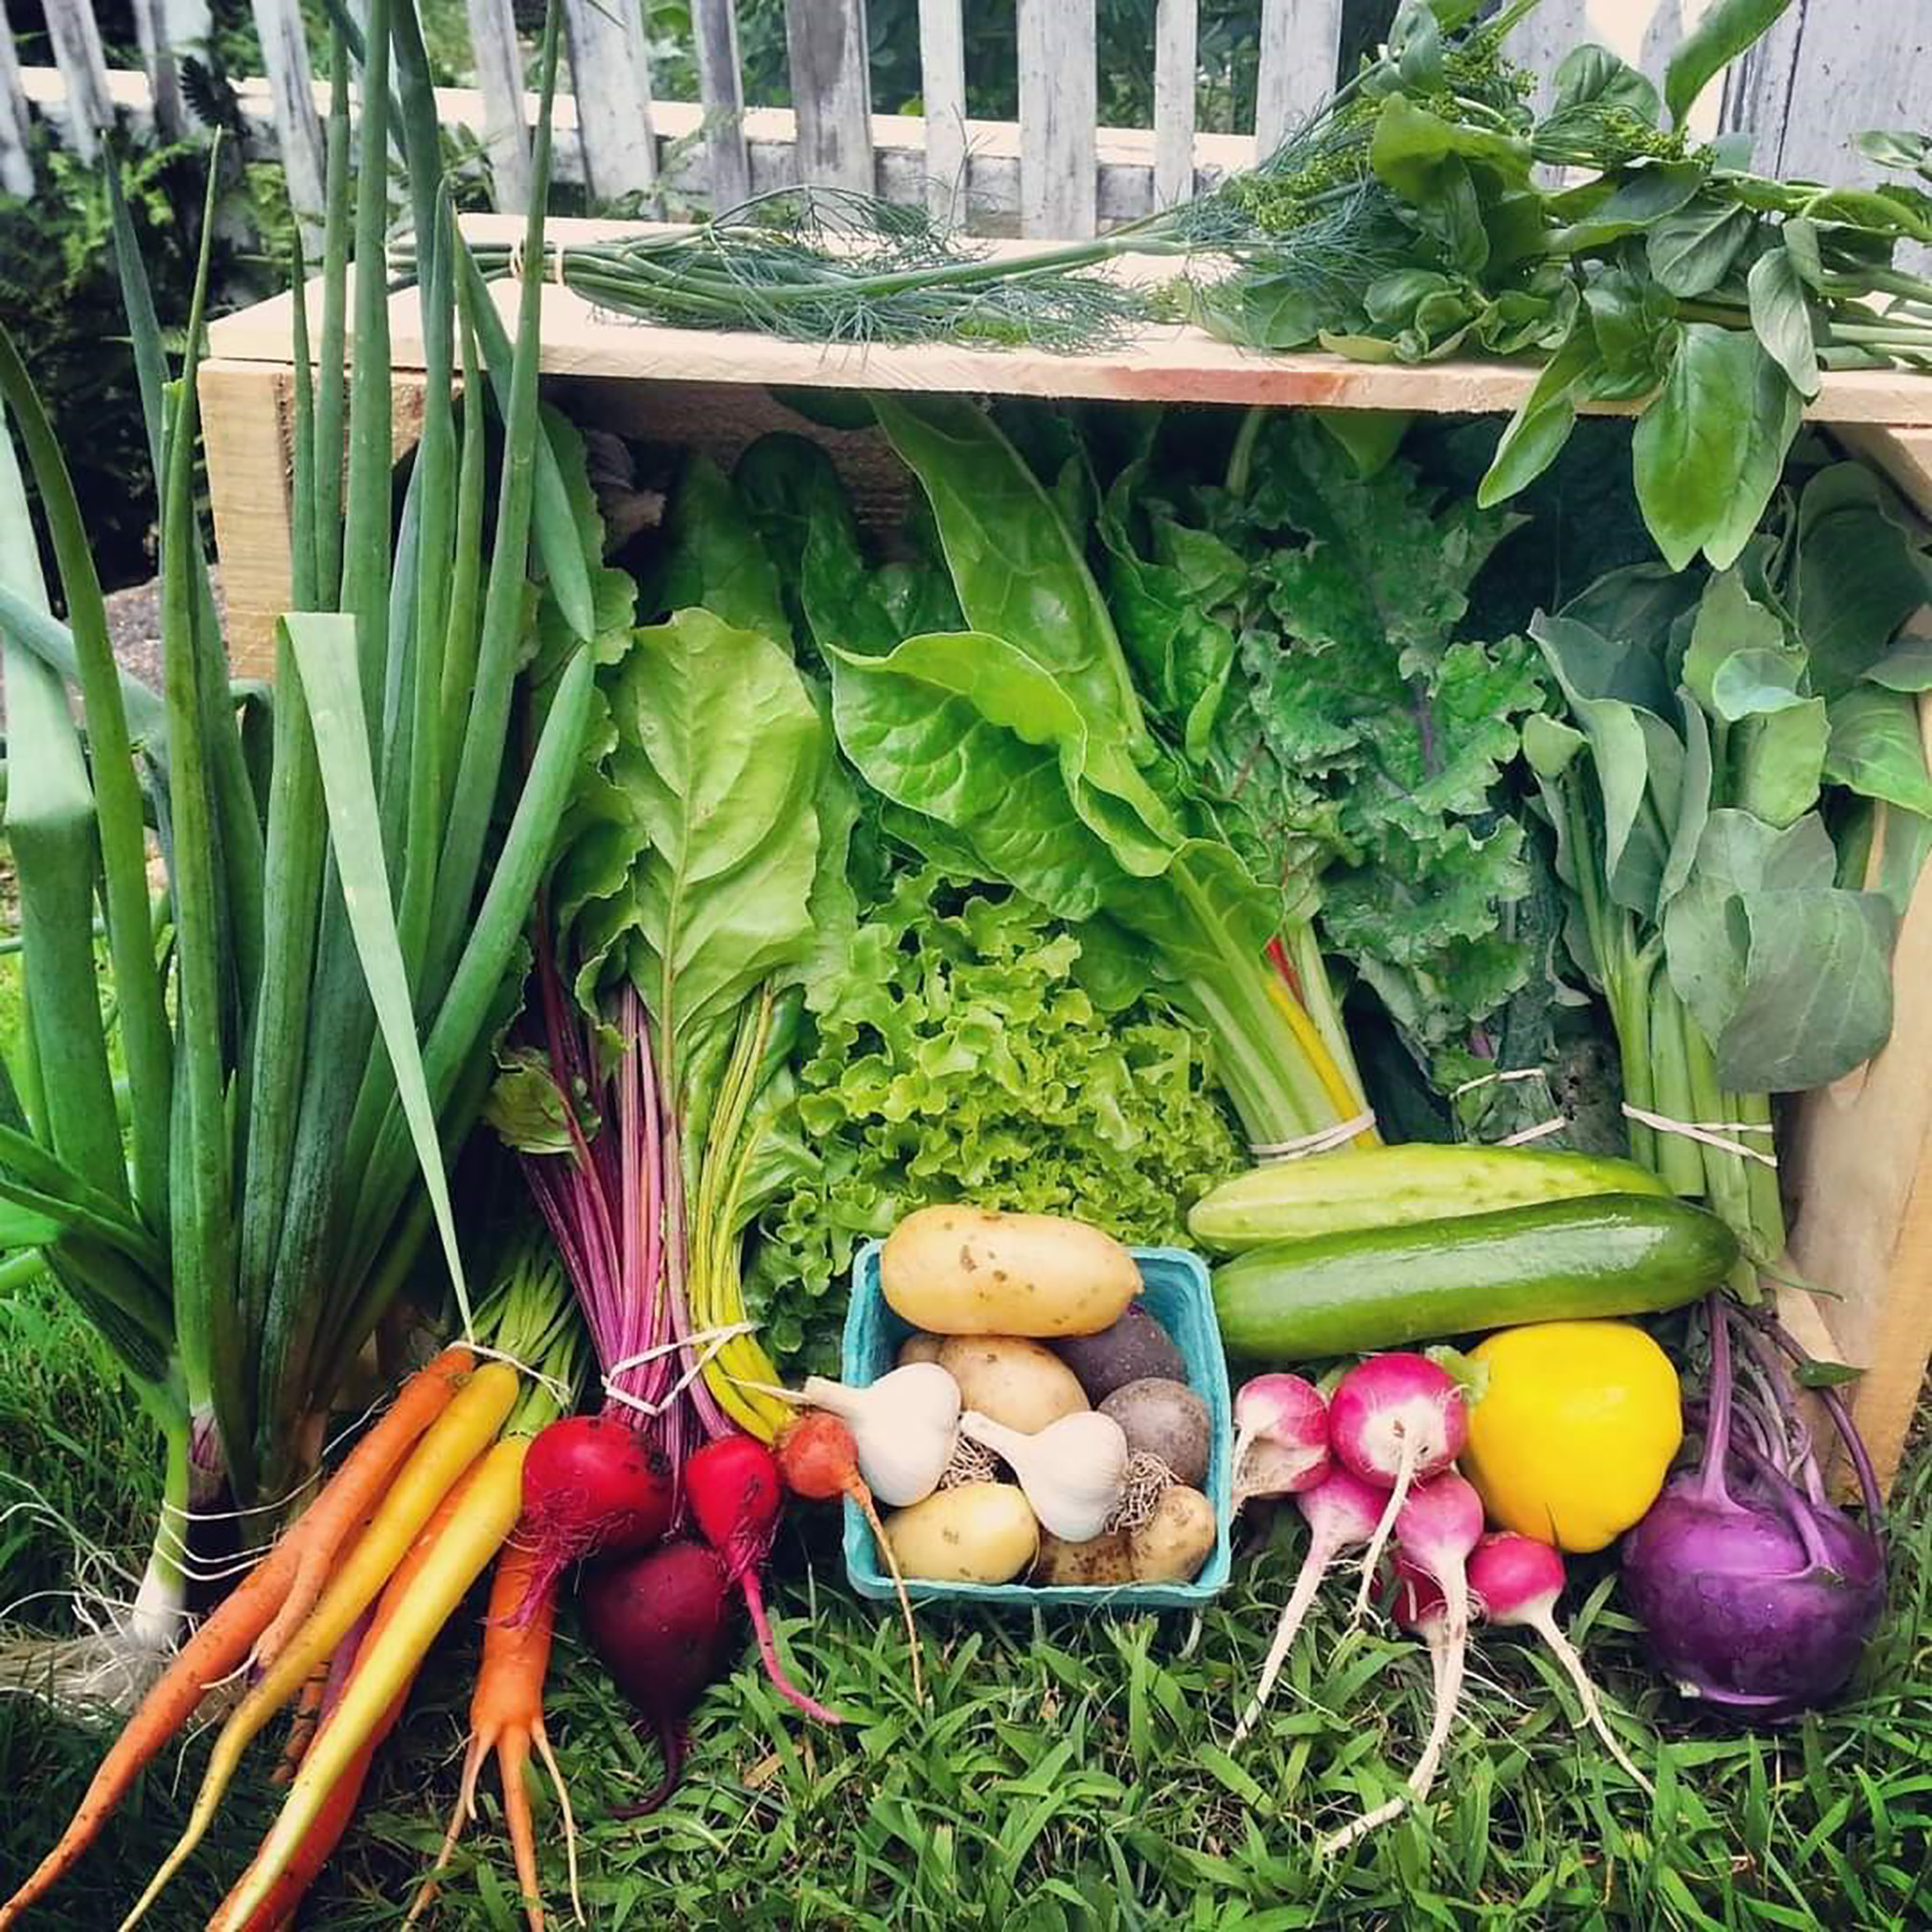 A display of farm-fresh vegetables in a wooden box. The vegetables include orange carrots, dark red beets,creamy white and purple potatoes, green leaves of Swiss chard and kale, pink radishes, and yellow and green summer squash.